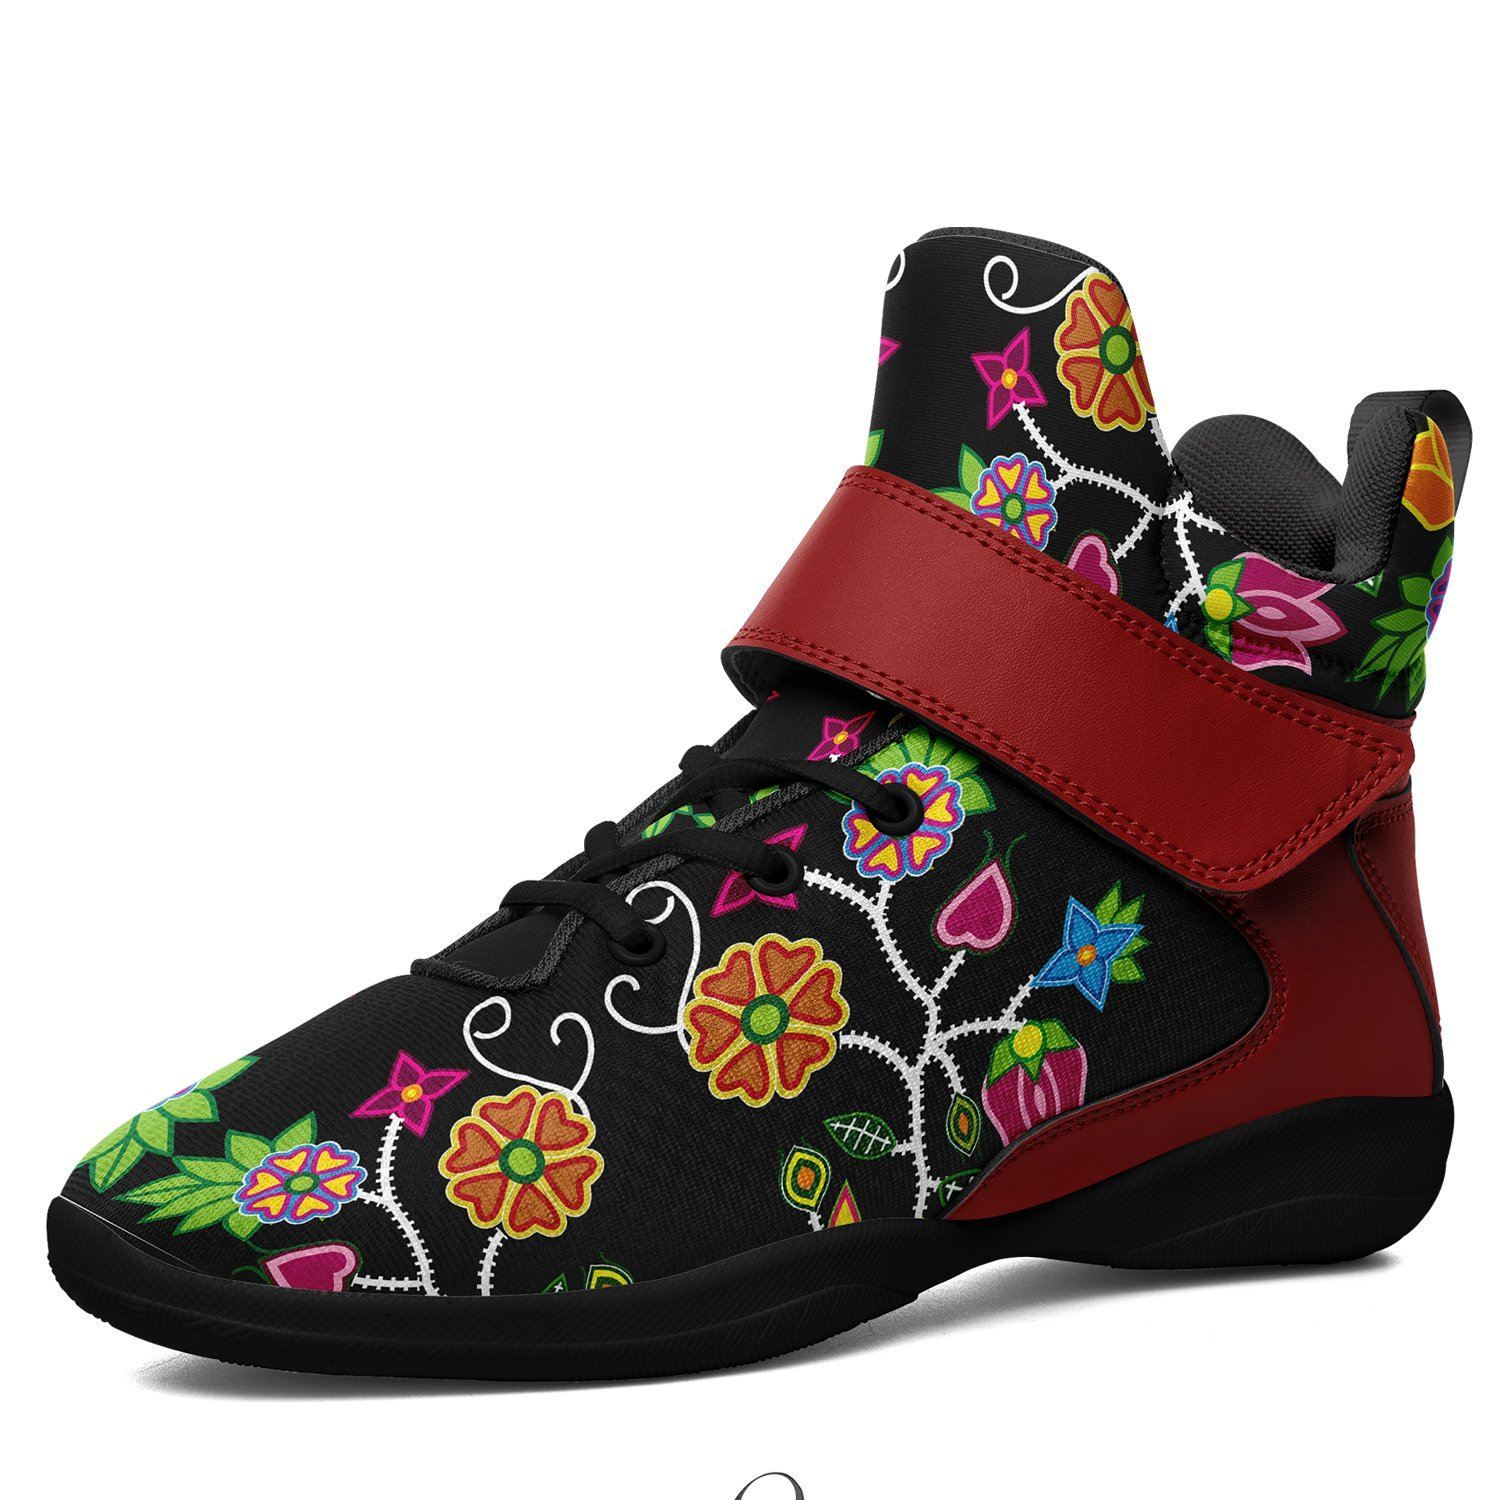 Floral Beadwork Ipottaa Basketball / Sport High Top Shoes - Black Sole 49 Dzine US Men 7 / EUR 40 Black Sole with Dark Red Strap 